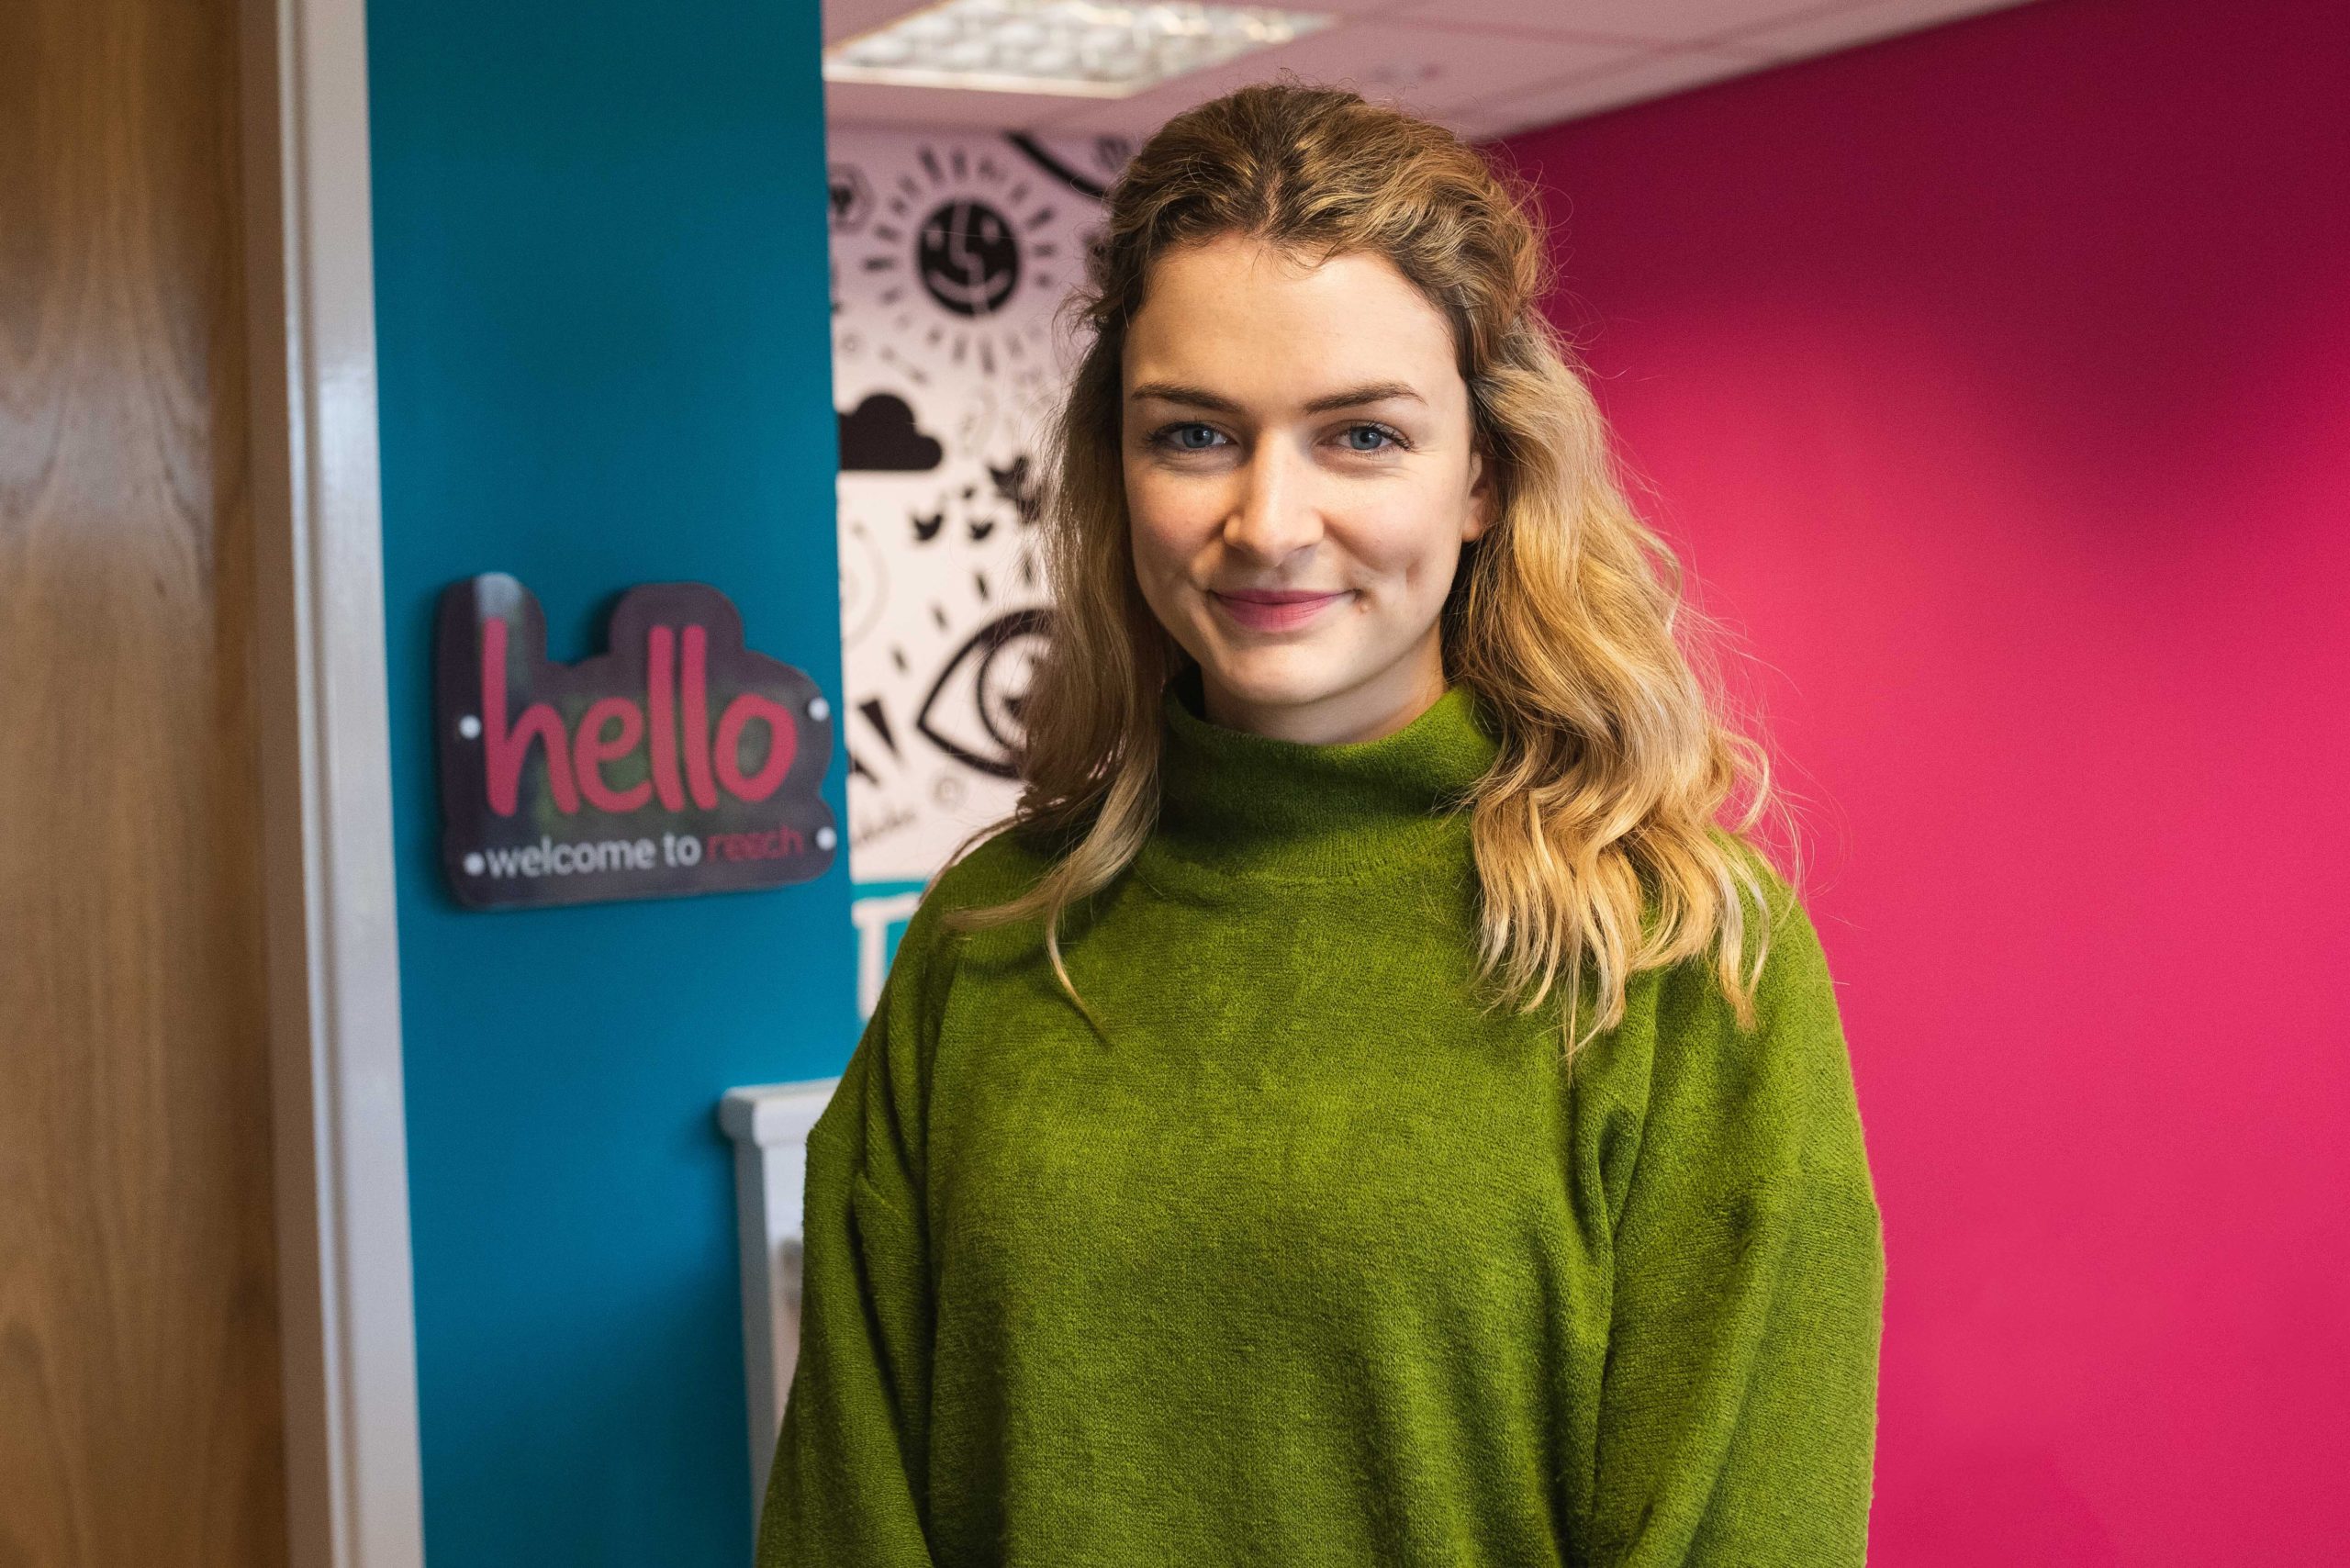 Faye joins as Client Success Manager